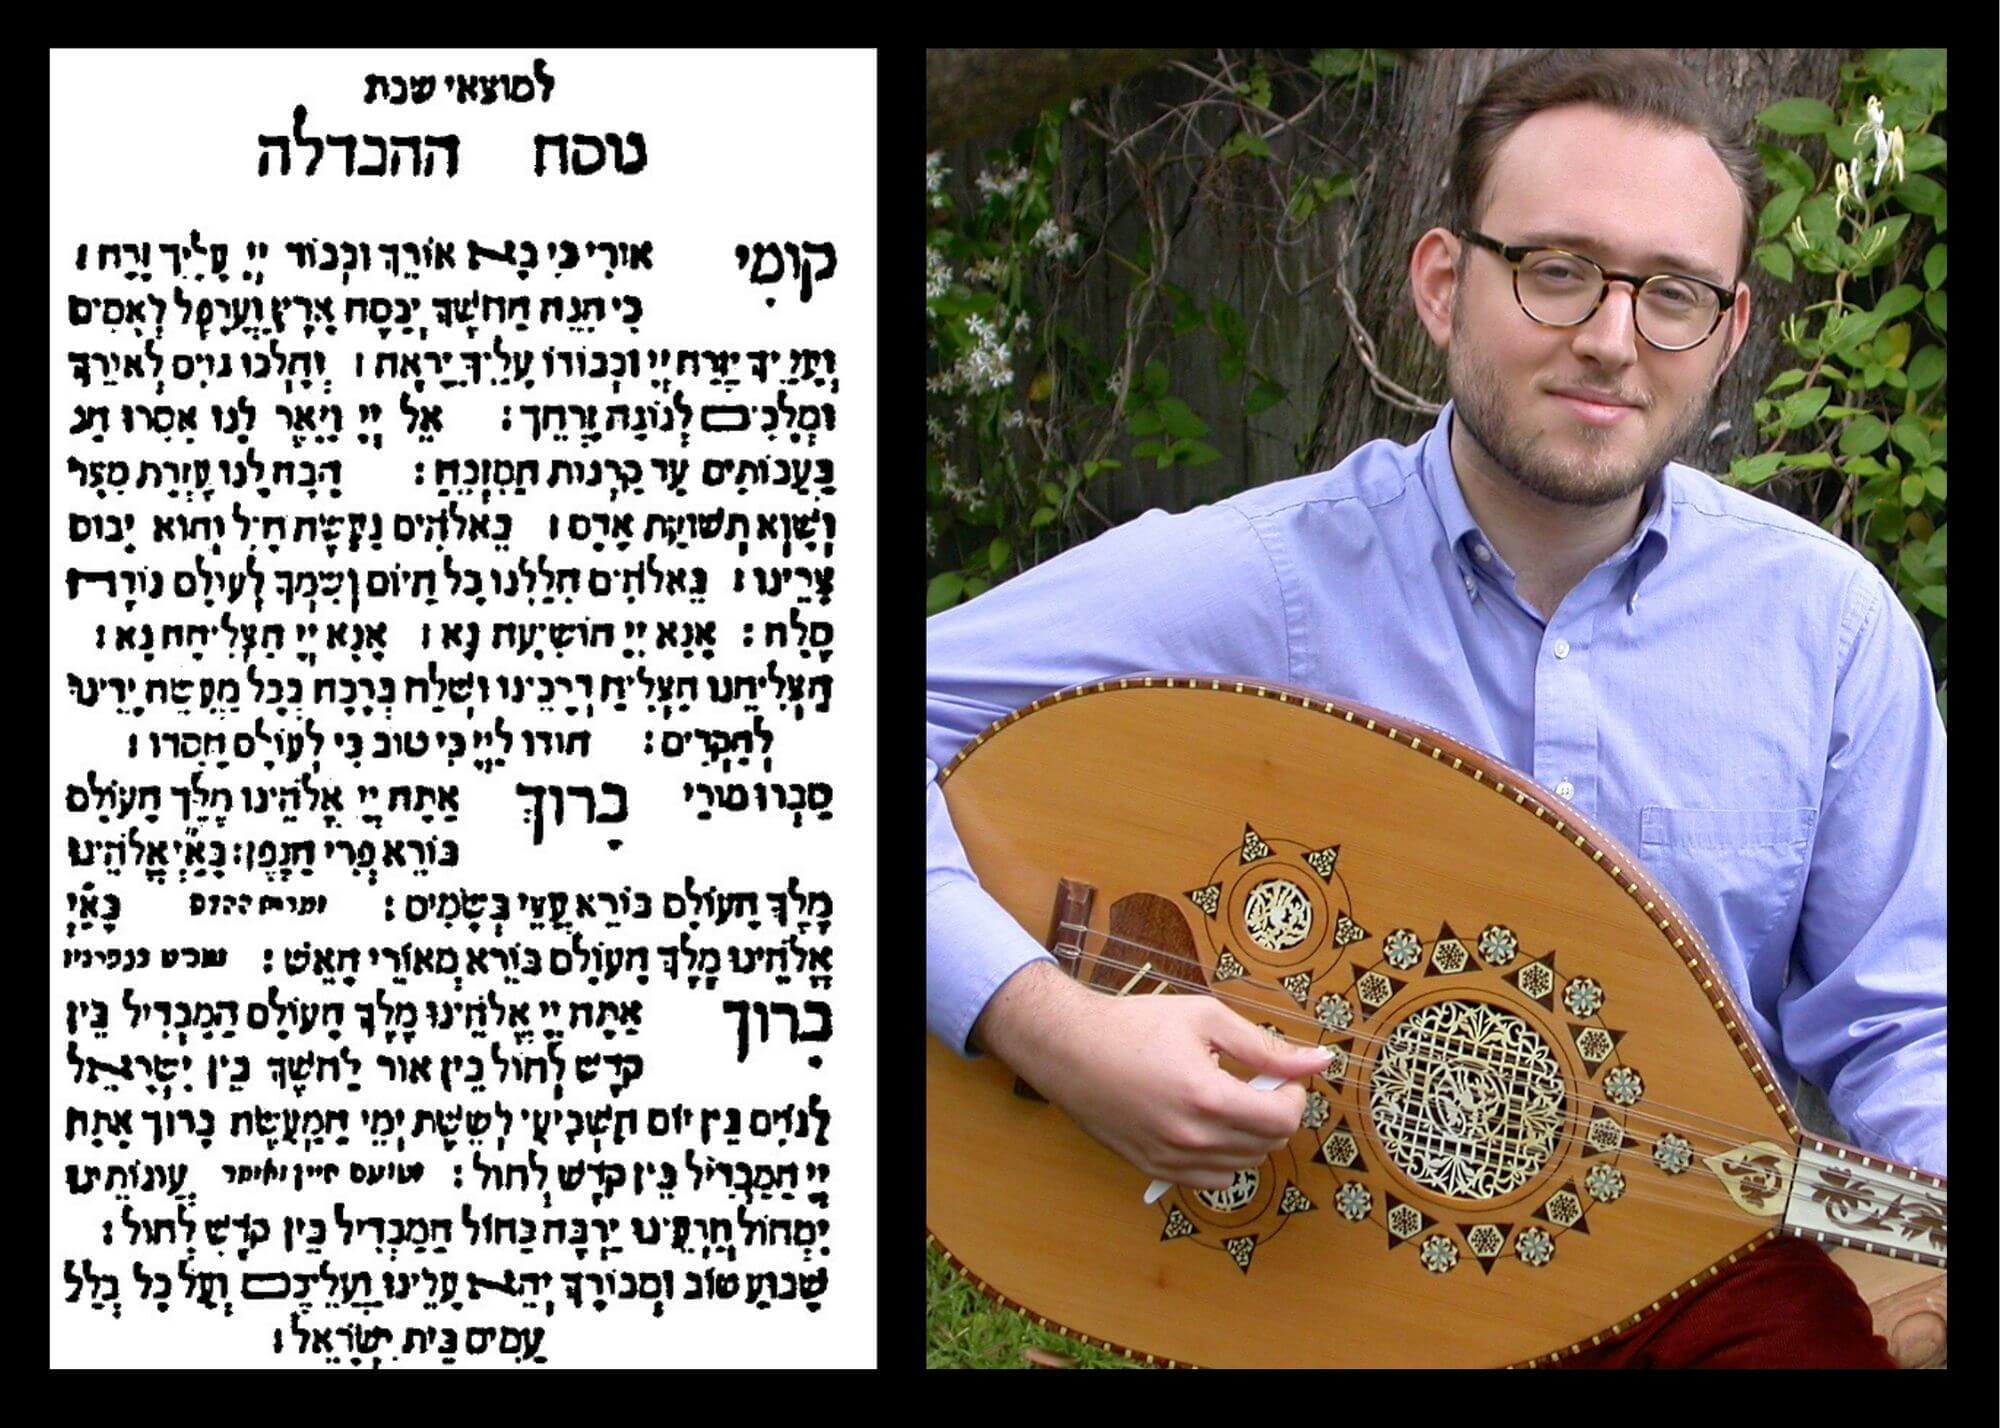 Jewish Prayer in Many Languages: Shabbat, by the Lowell Milken Center for Music of American Jewish Experience